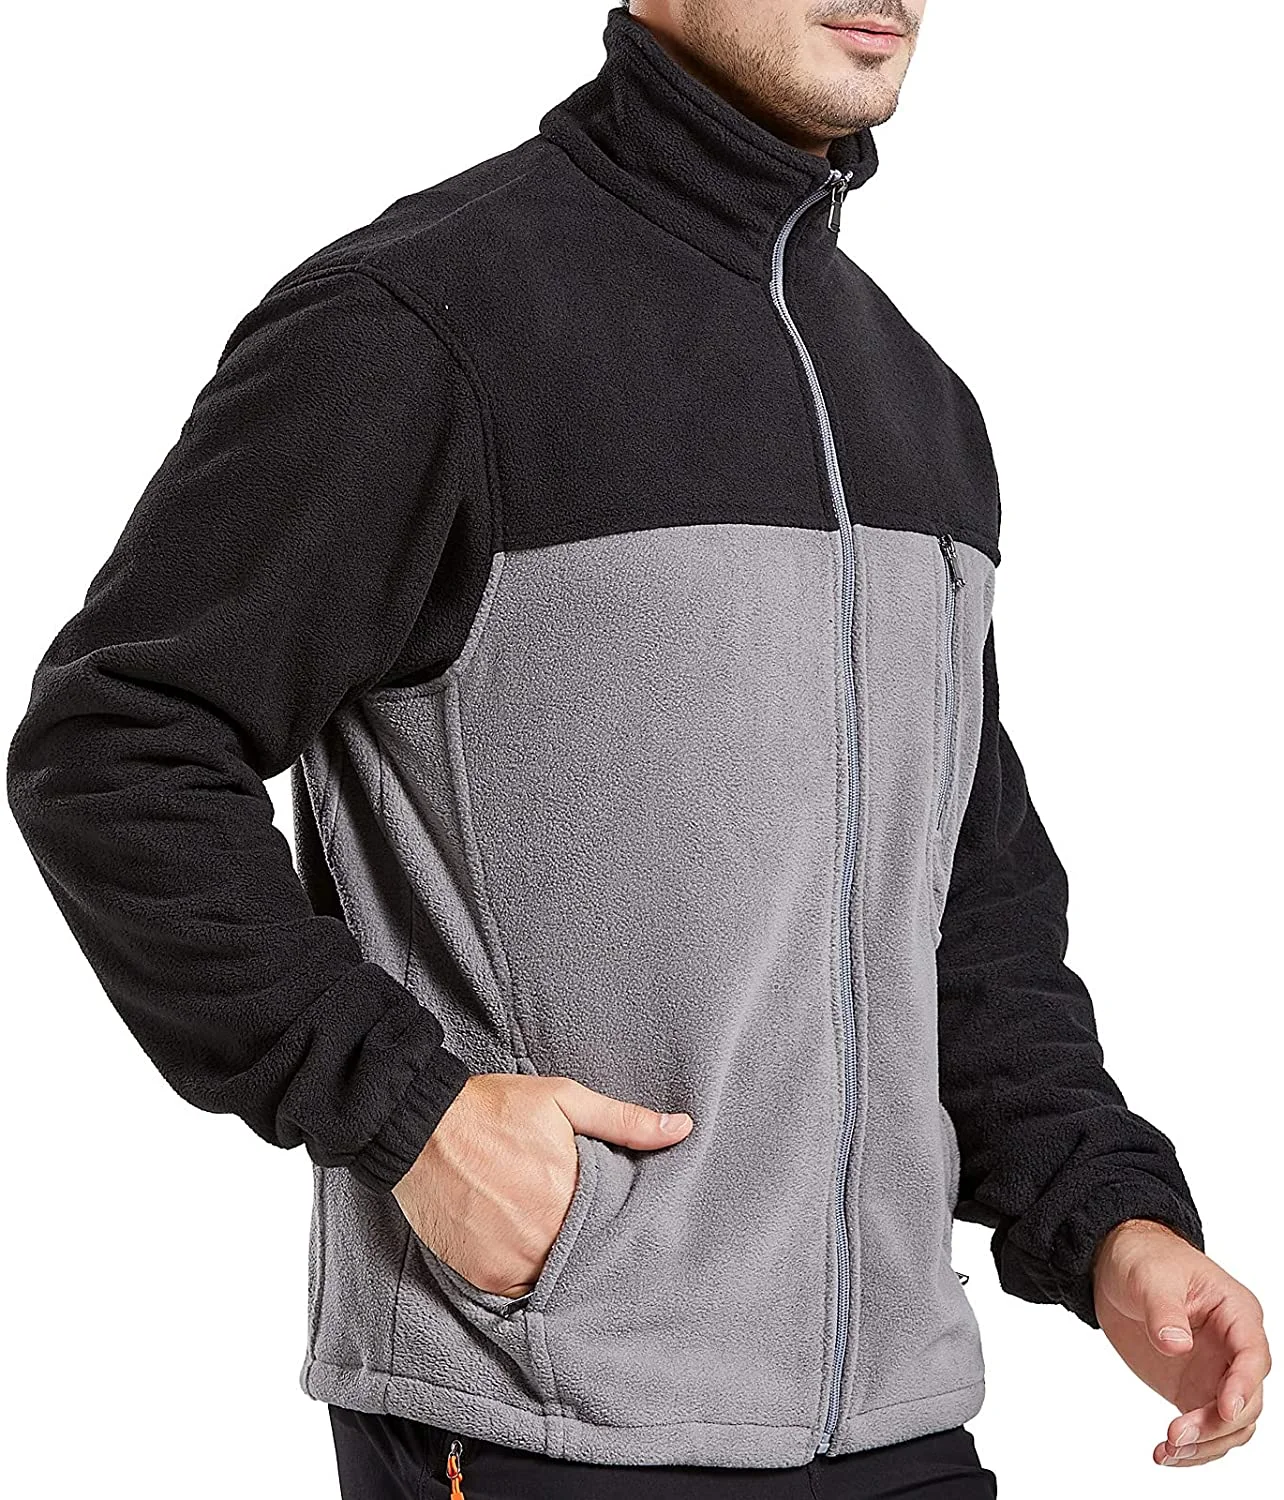 performance outdoor clothing - Bangladesh Factory, Suppliers, Manufacturers